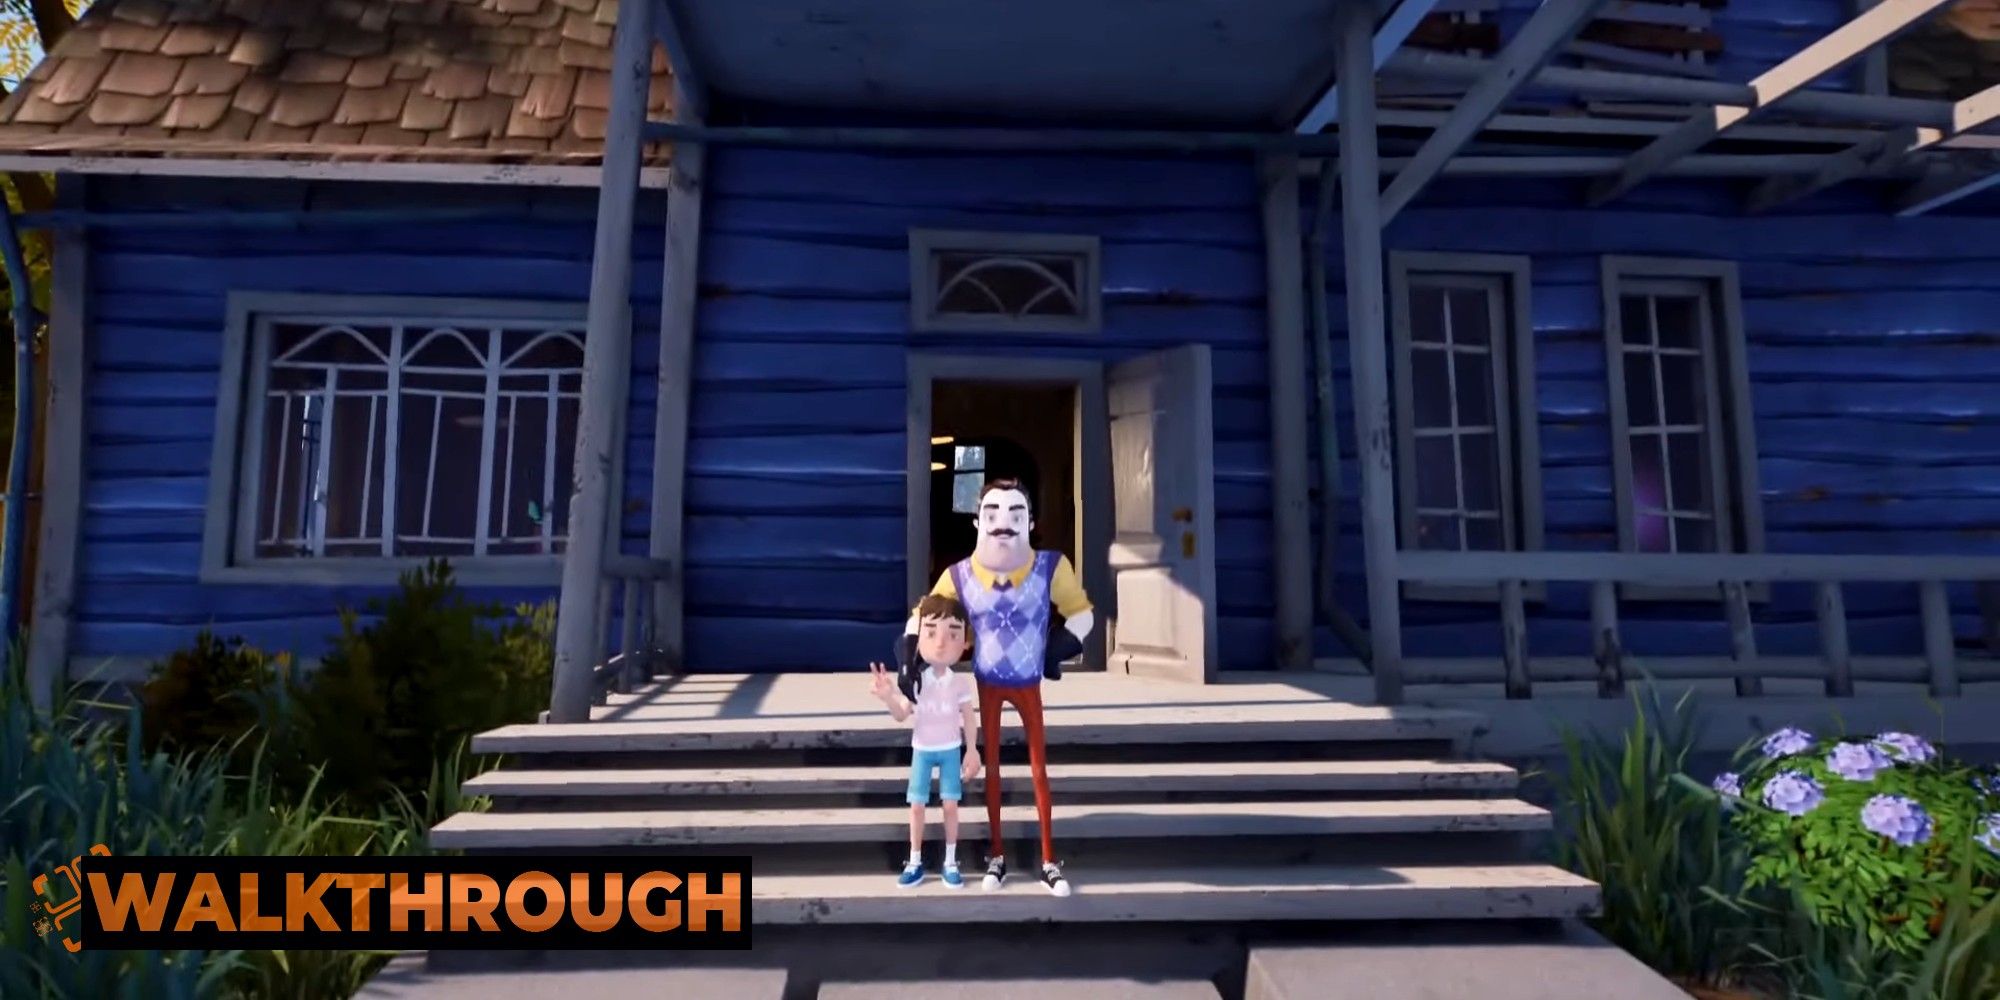 The neighbor stands in front of his house and poses for a photo with a little boy in Hello Neighbor 2